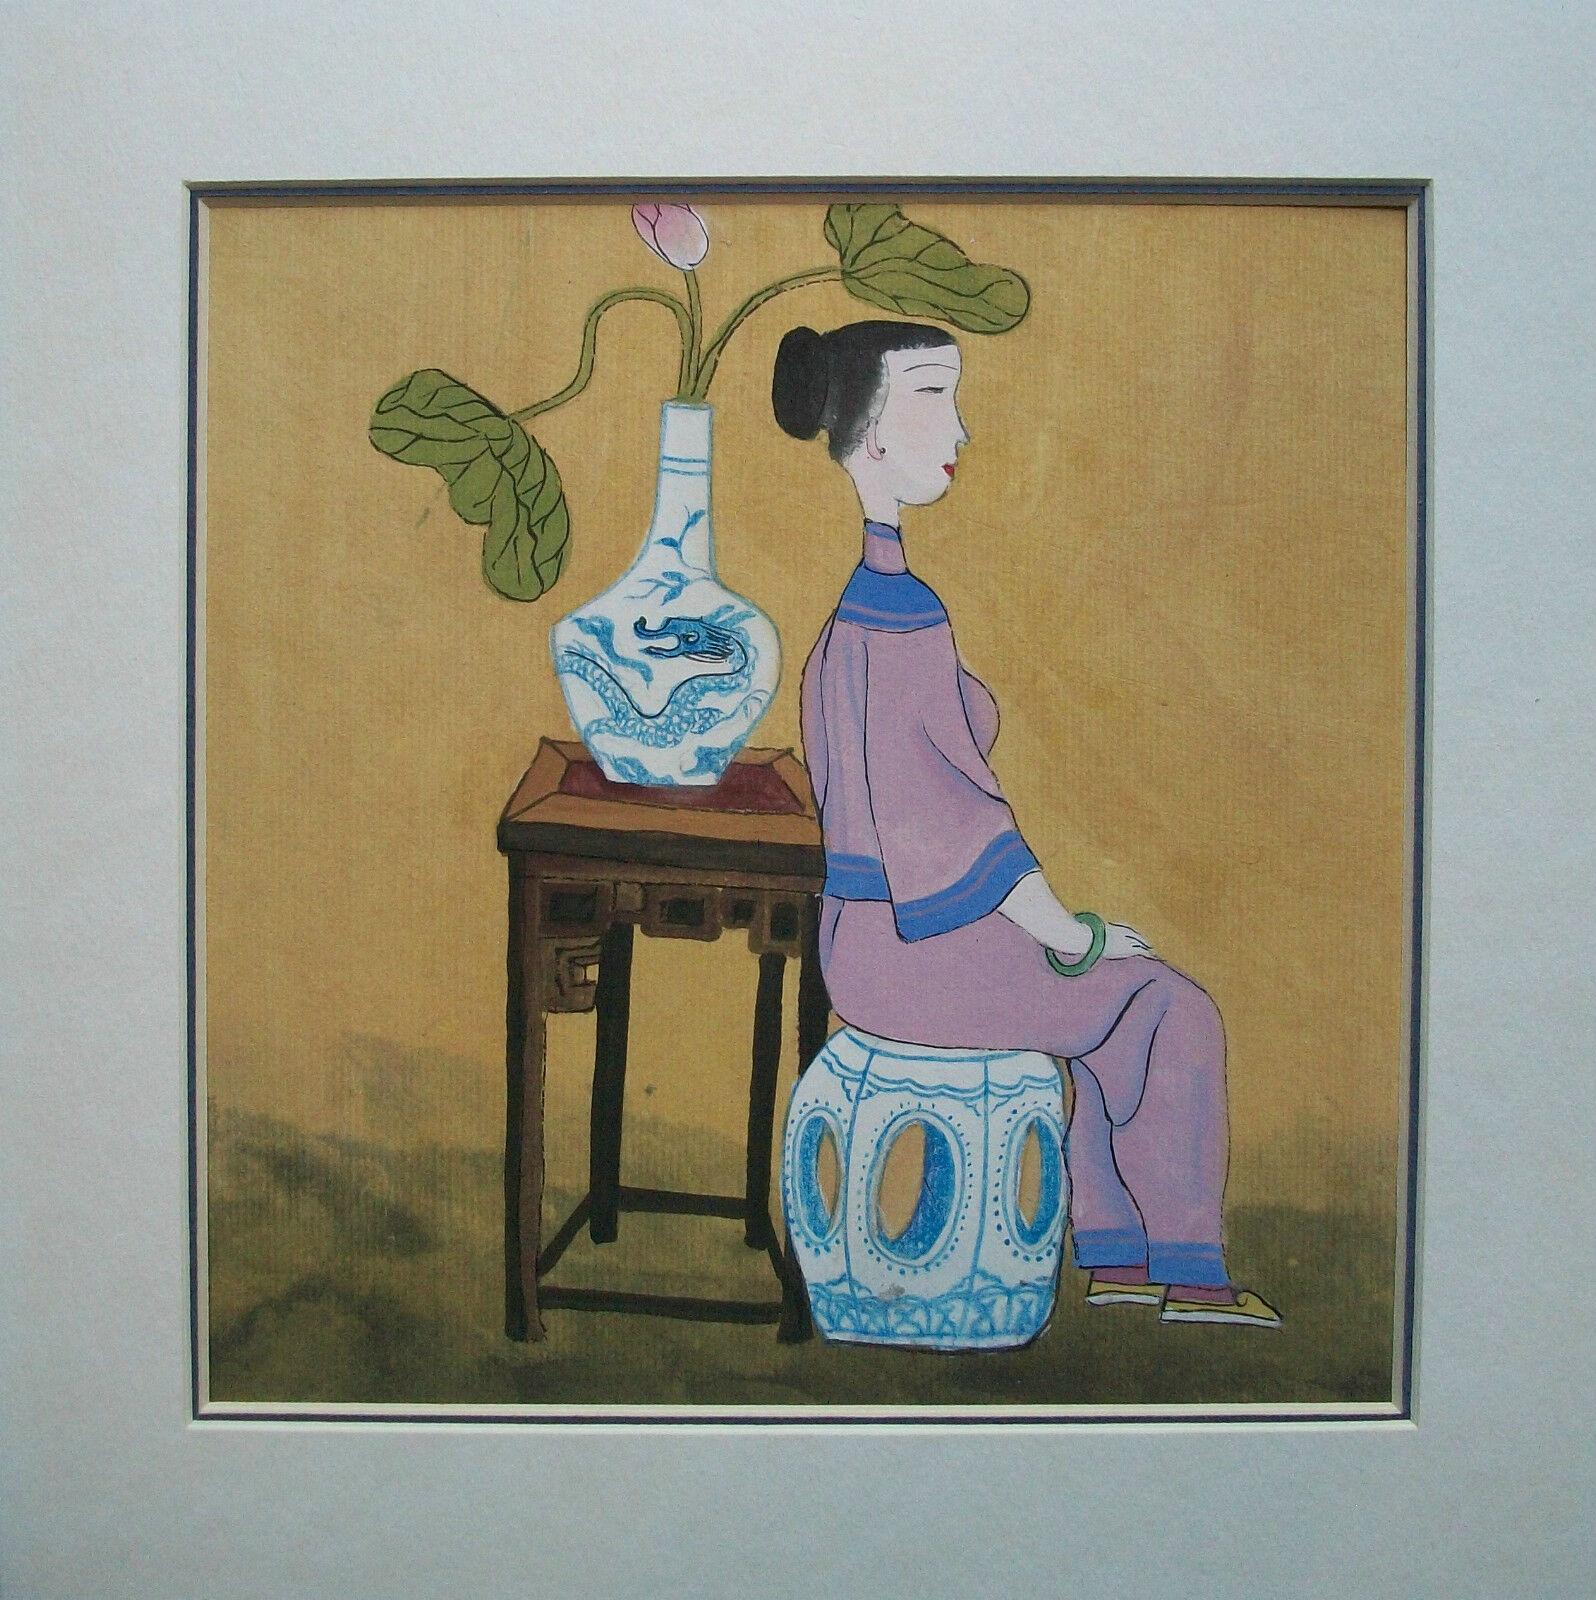 Vintage gouache painting on paper - good quality and composition - mounted with adhesive tape to a two color/double beveled matte board - unsigned - China - late 20th century.

Excellent vintage condition - no loss - no damage - no restoration -